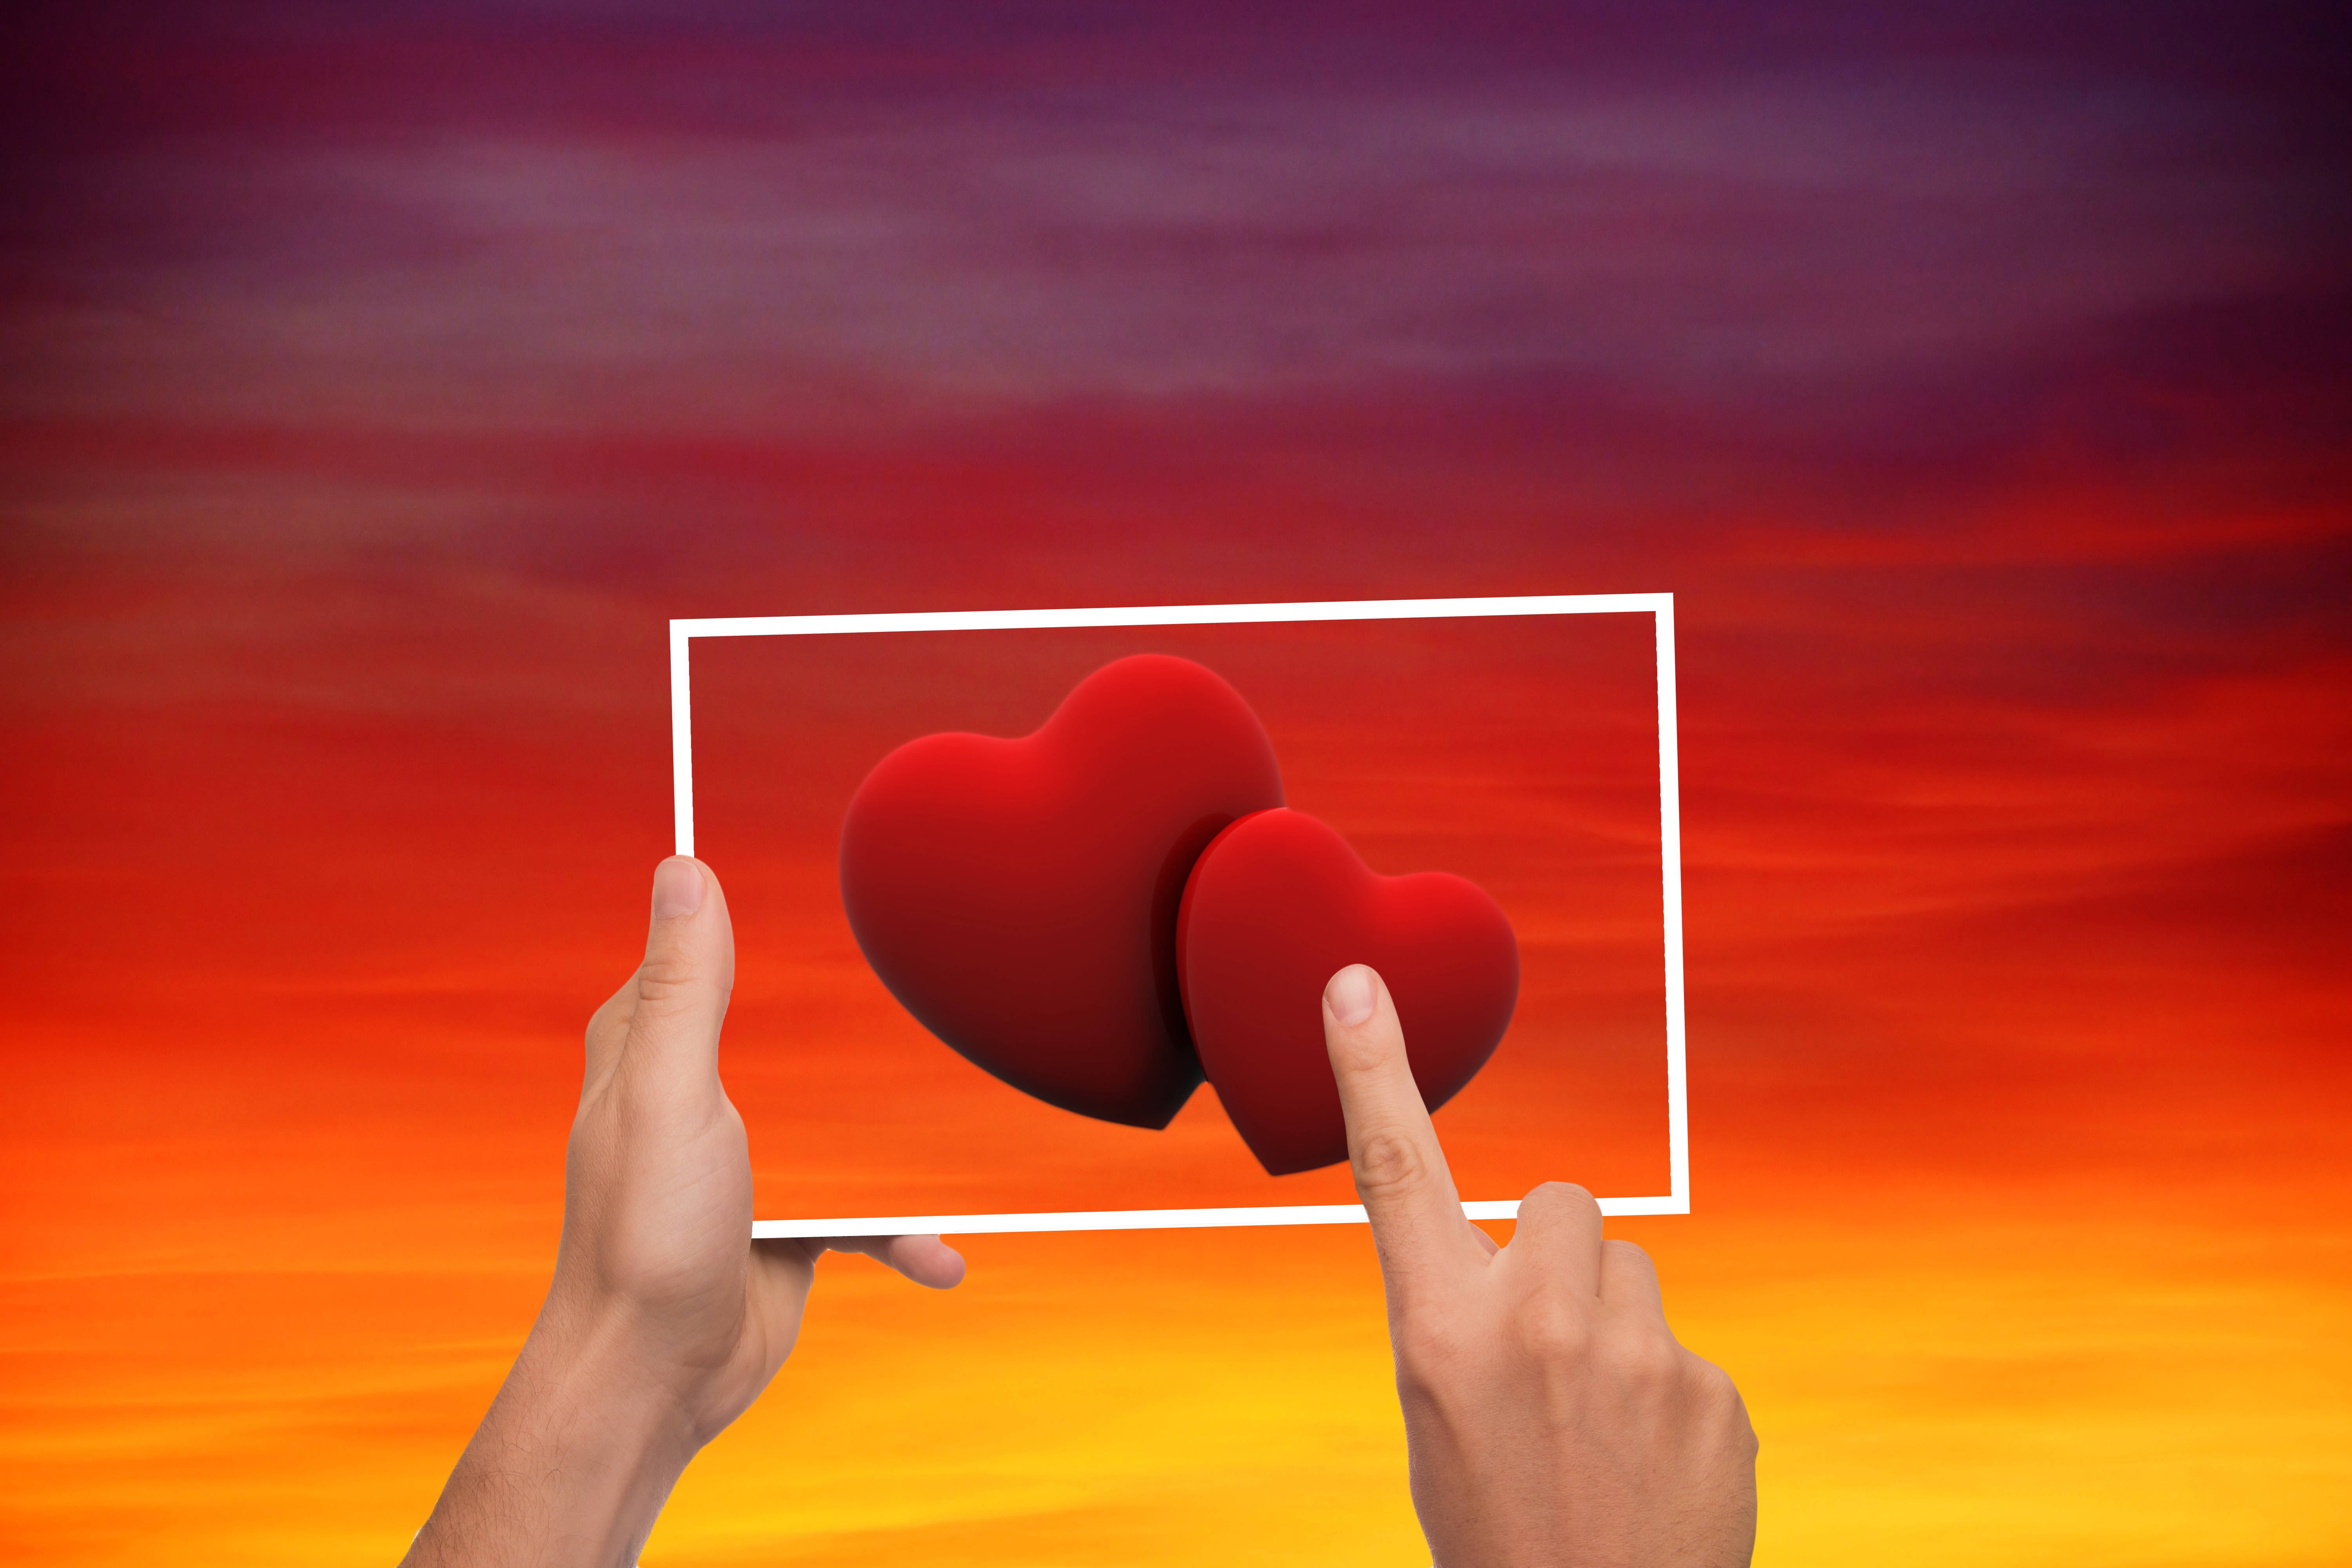 Sky Heart Love Fingers Free Image Download